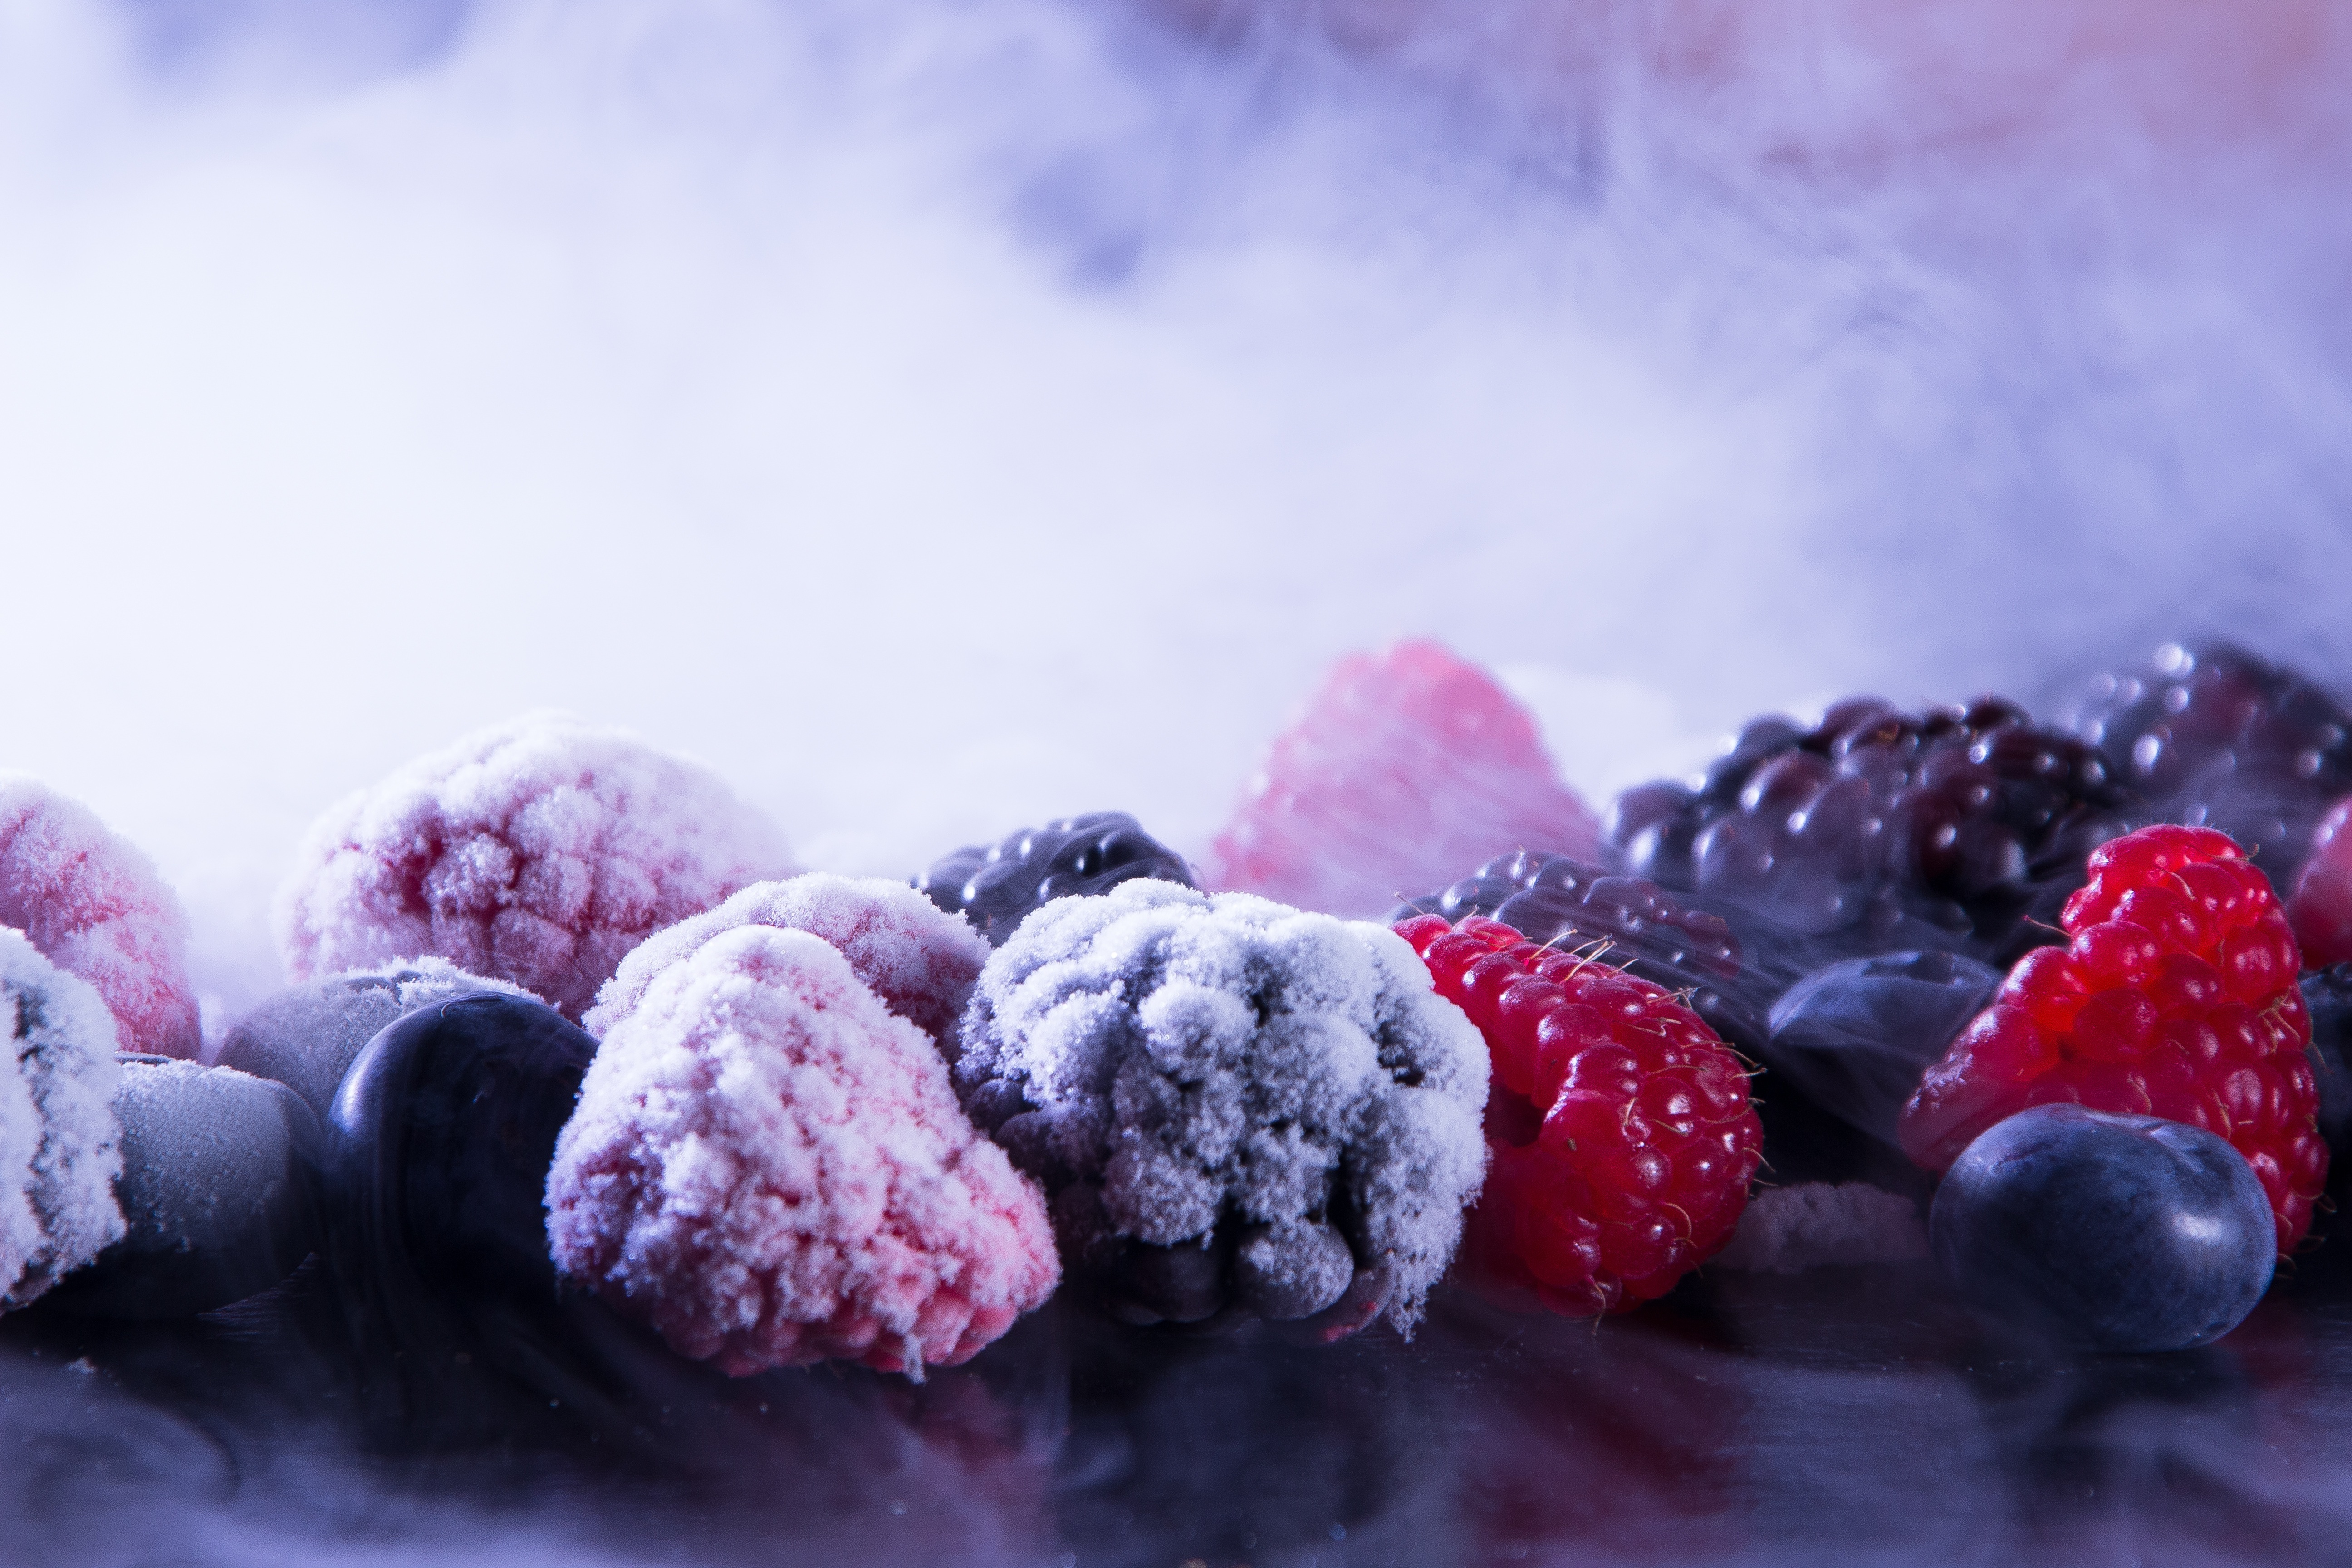 ice, bilberries, blackberry, food collection of HD images